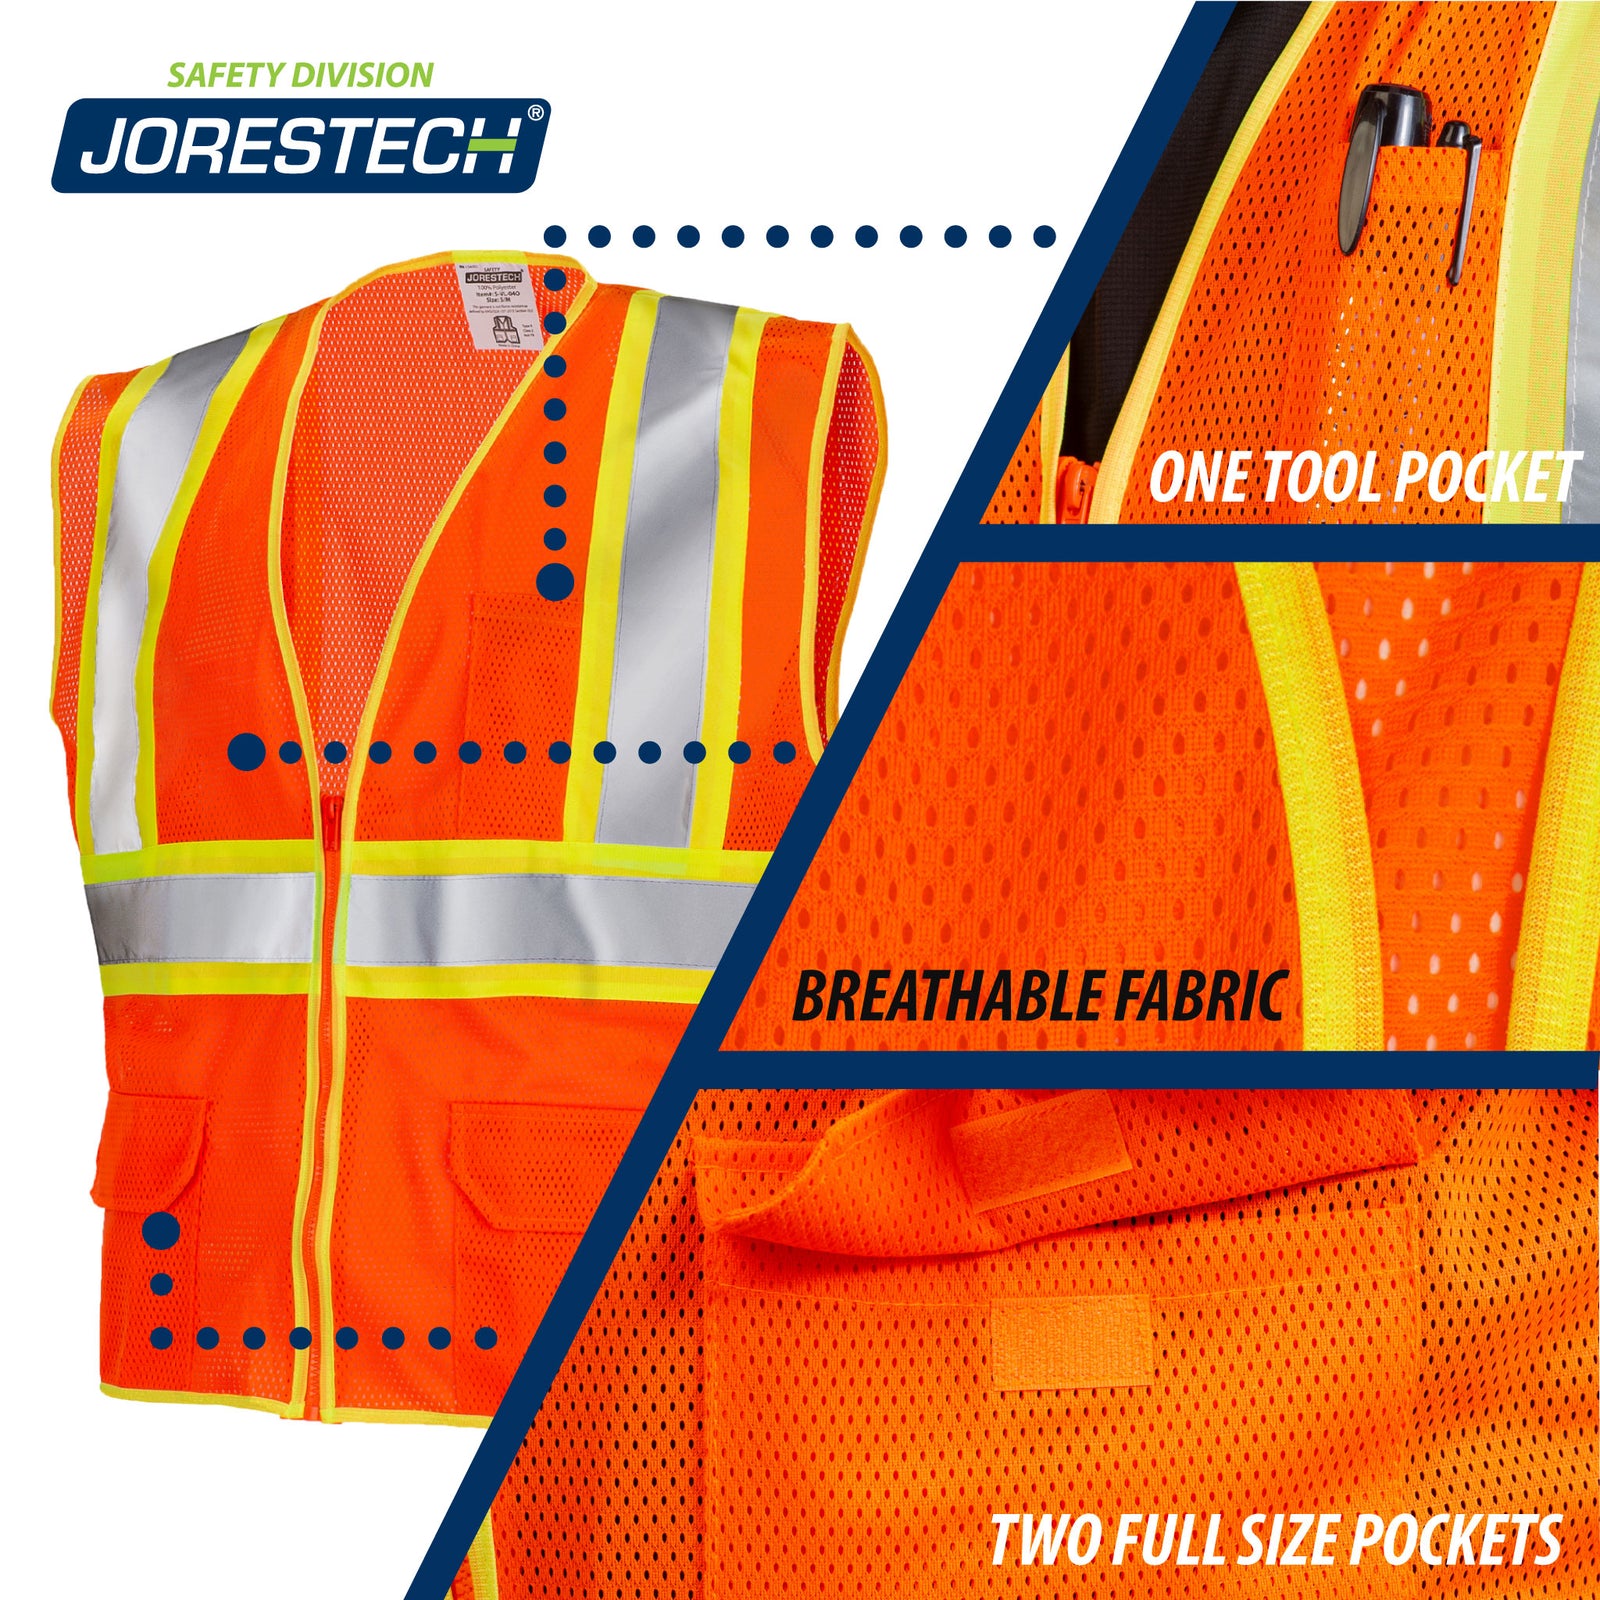 Image of the orange safety vest with 3 call outs one tool pocket, breathable fabric, two full size pockets.